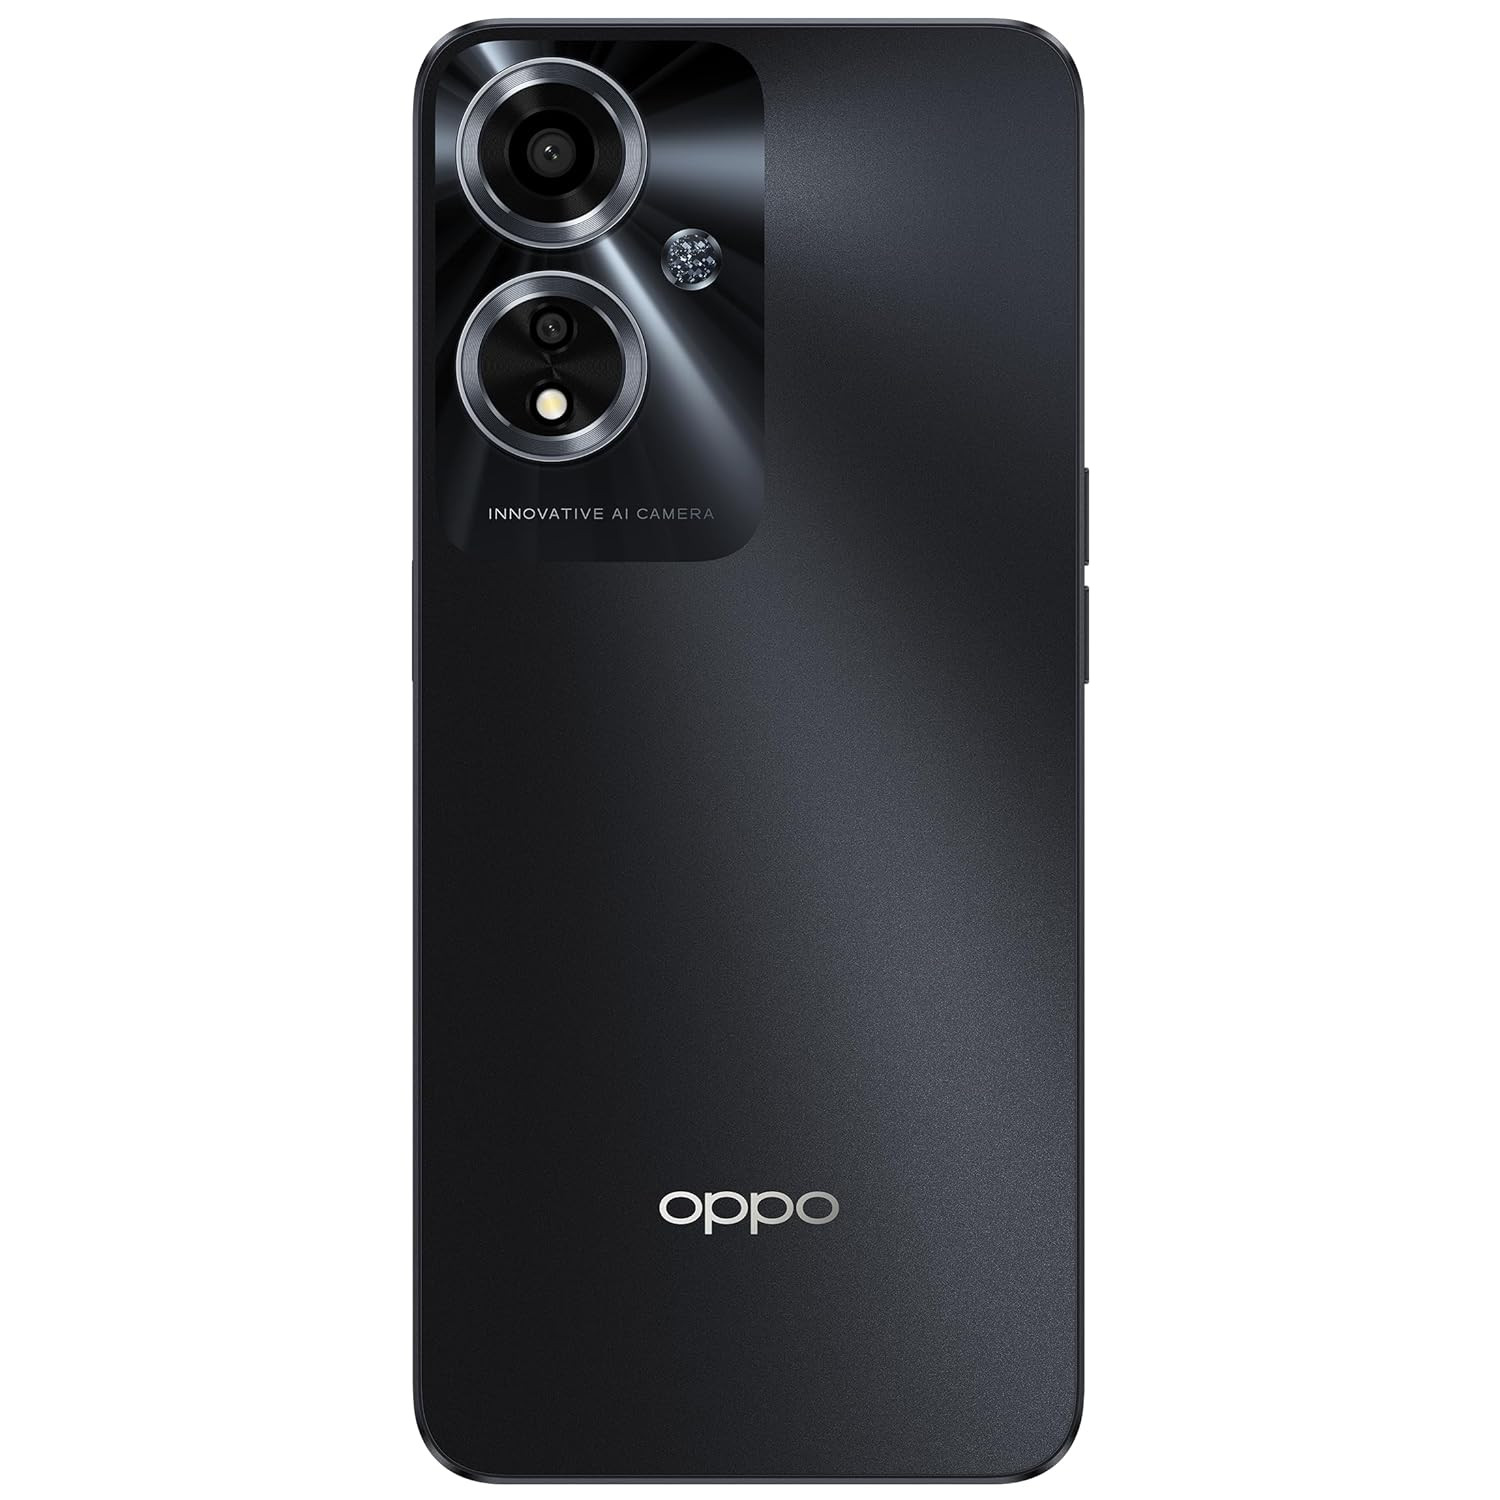 OPPO A59 5G (Starry Black, 4GB RAM, 128GB Storage) | 5000 mAh Battery with 33W SUPERVOOC Charger | 6.56